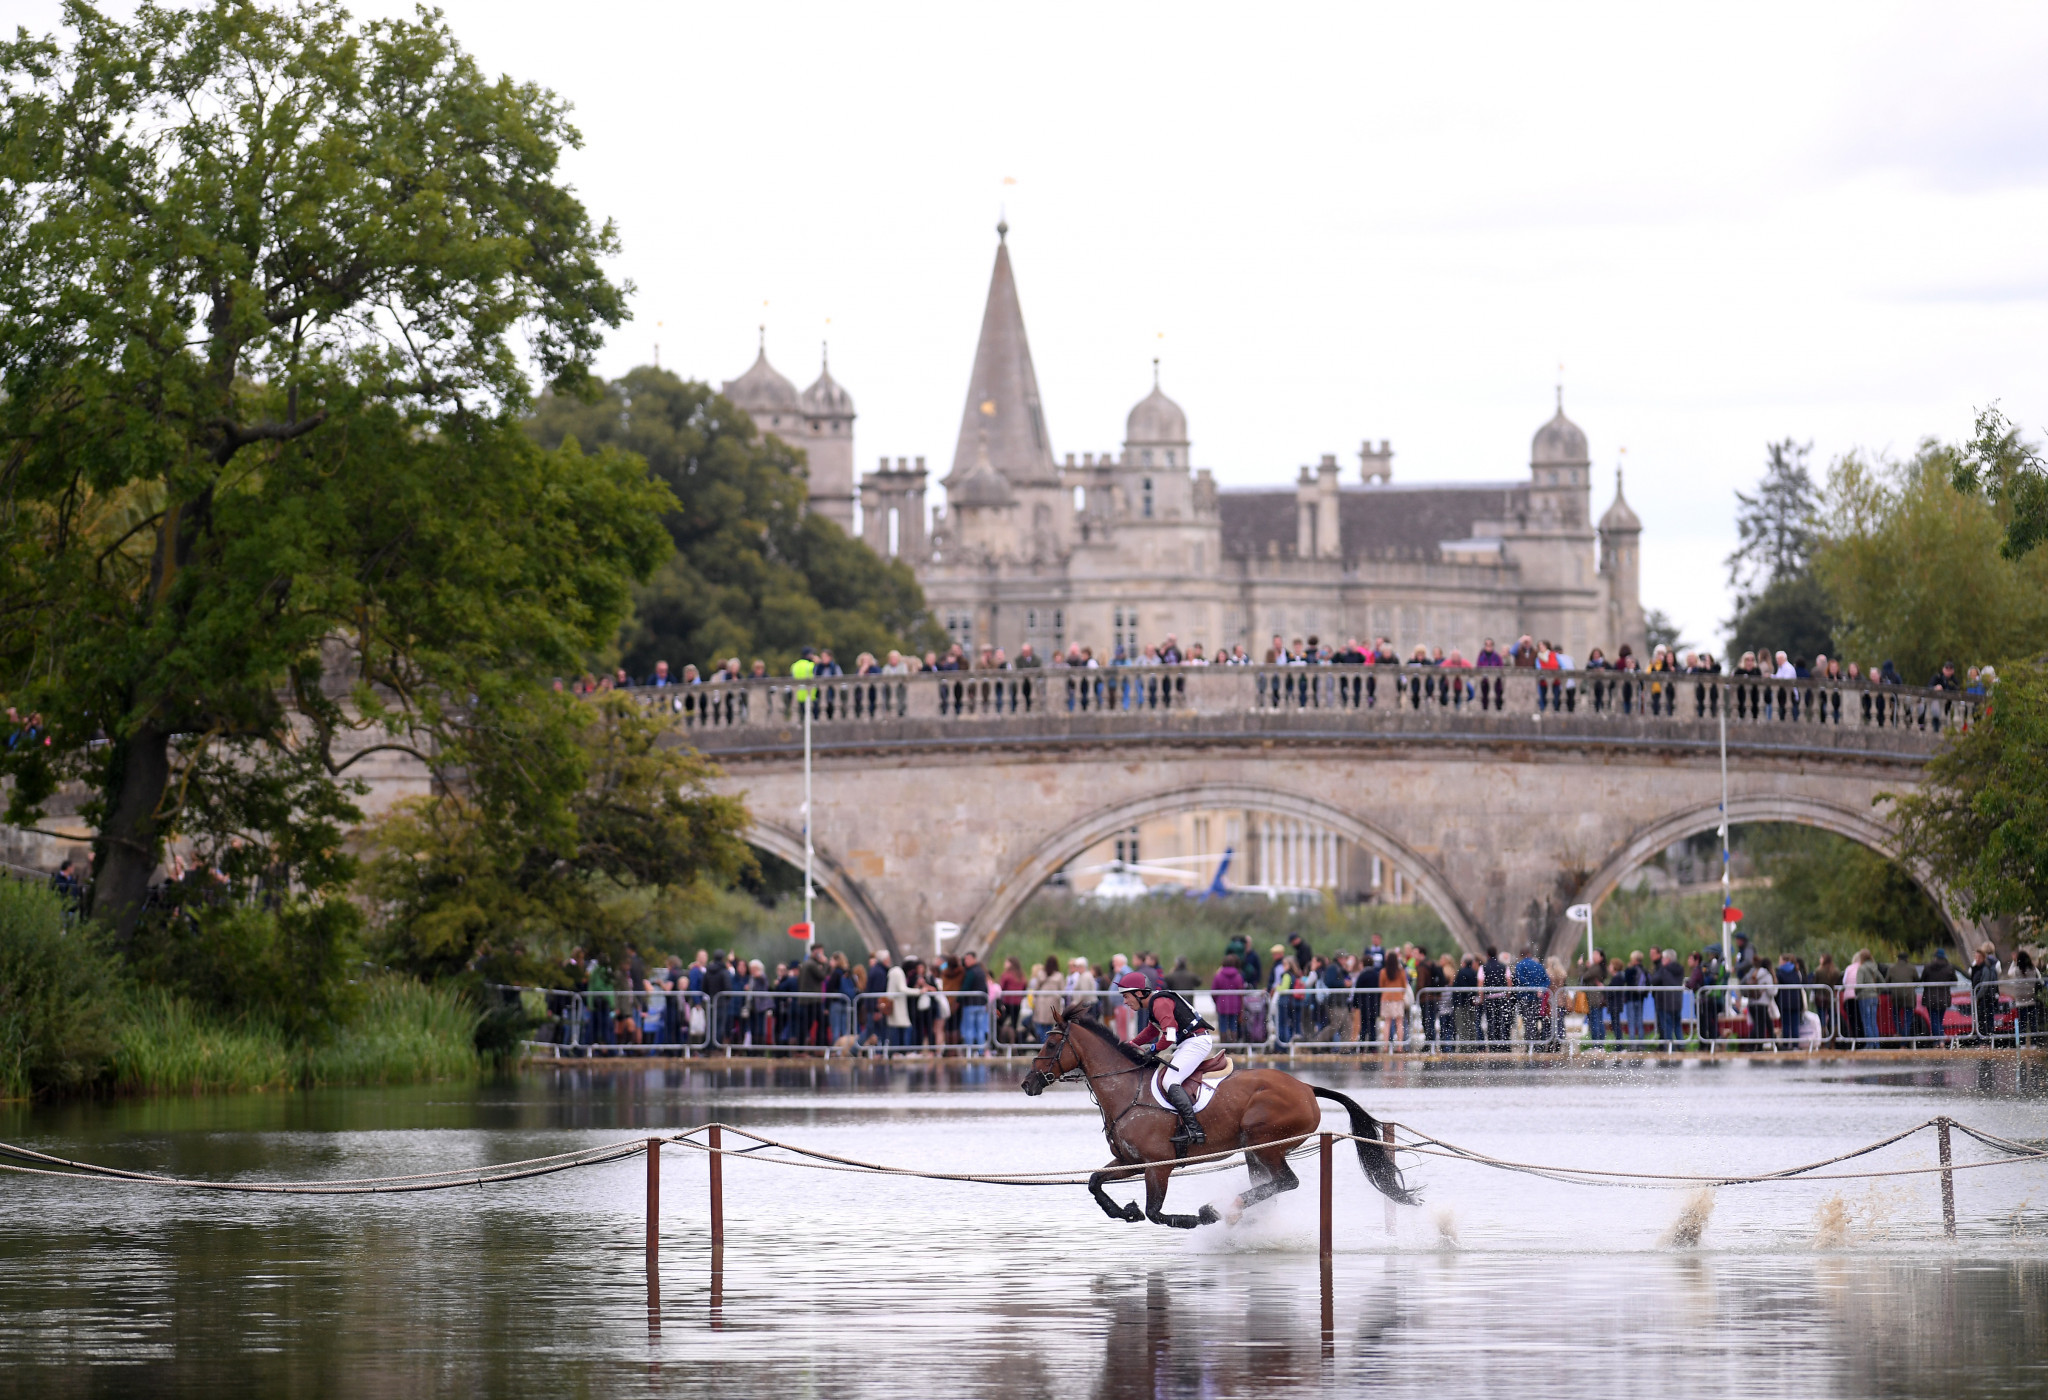 Burghley Horse Trials cancelled for second consecutive year over COVID19